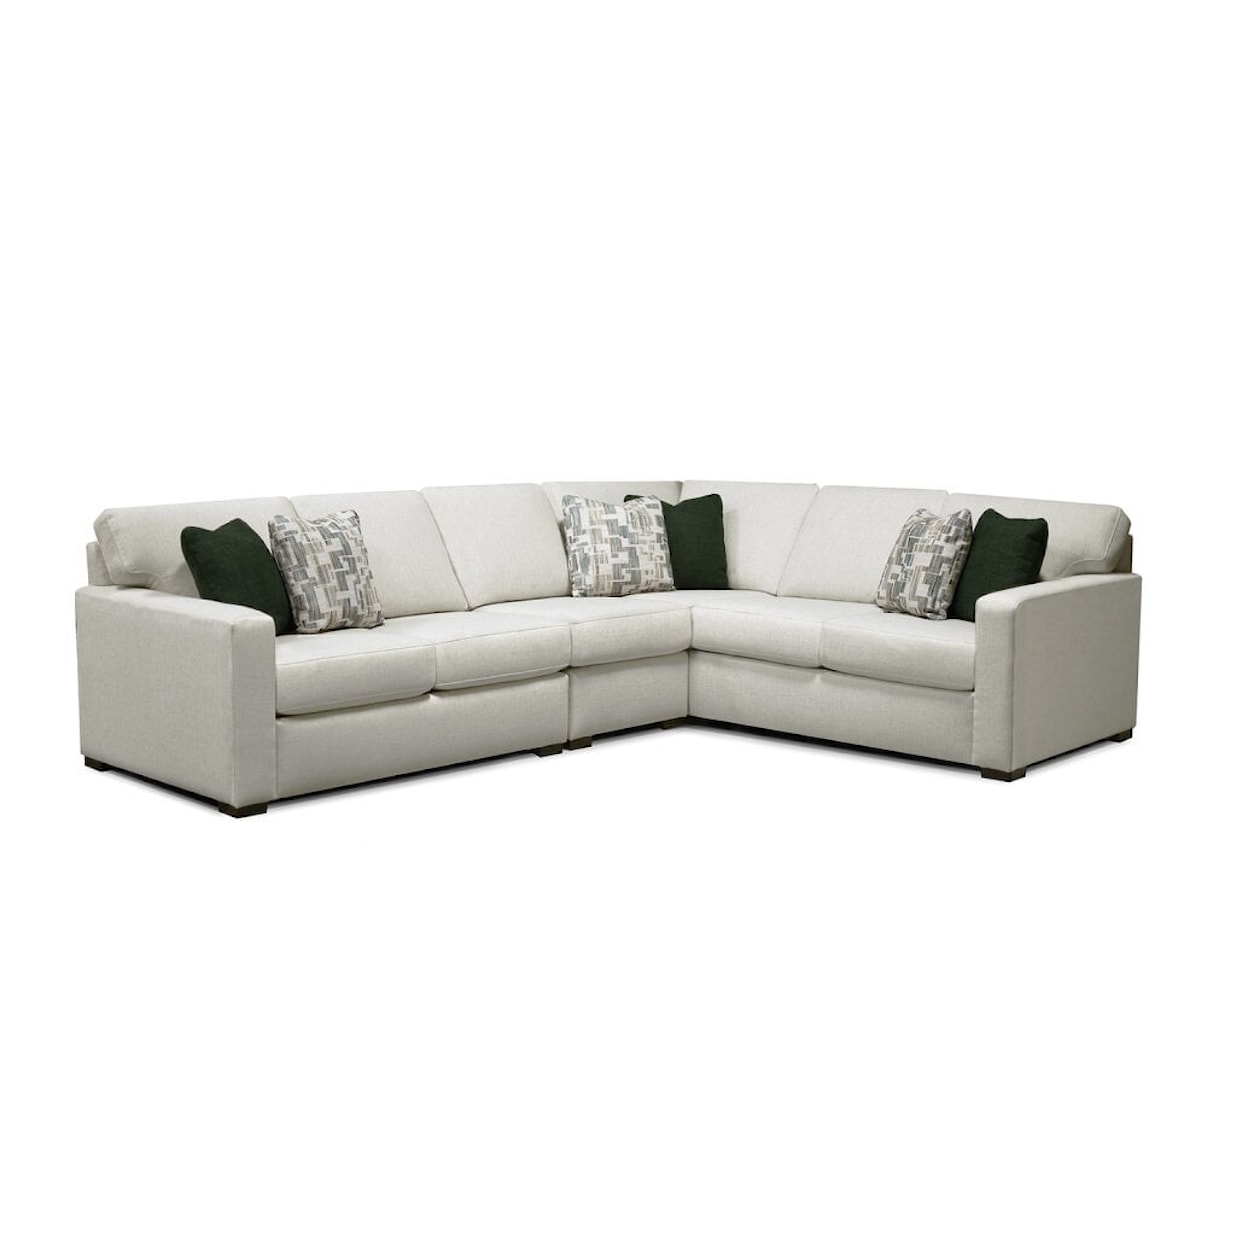 Dimensions 6250/AL Series Baylor Sectional